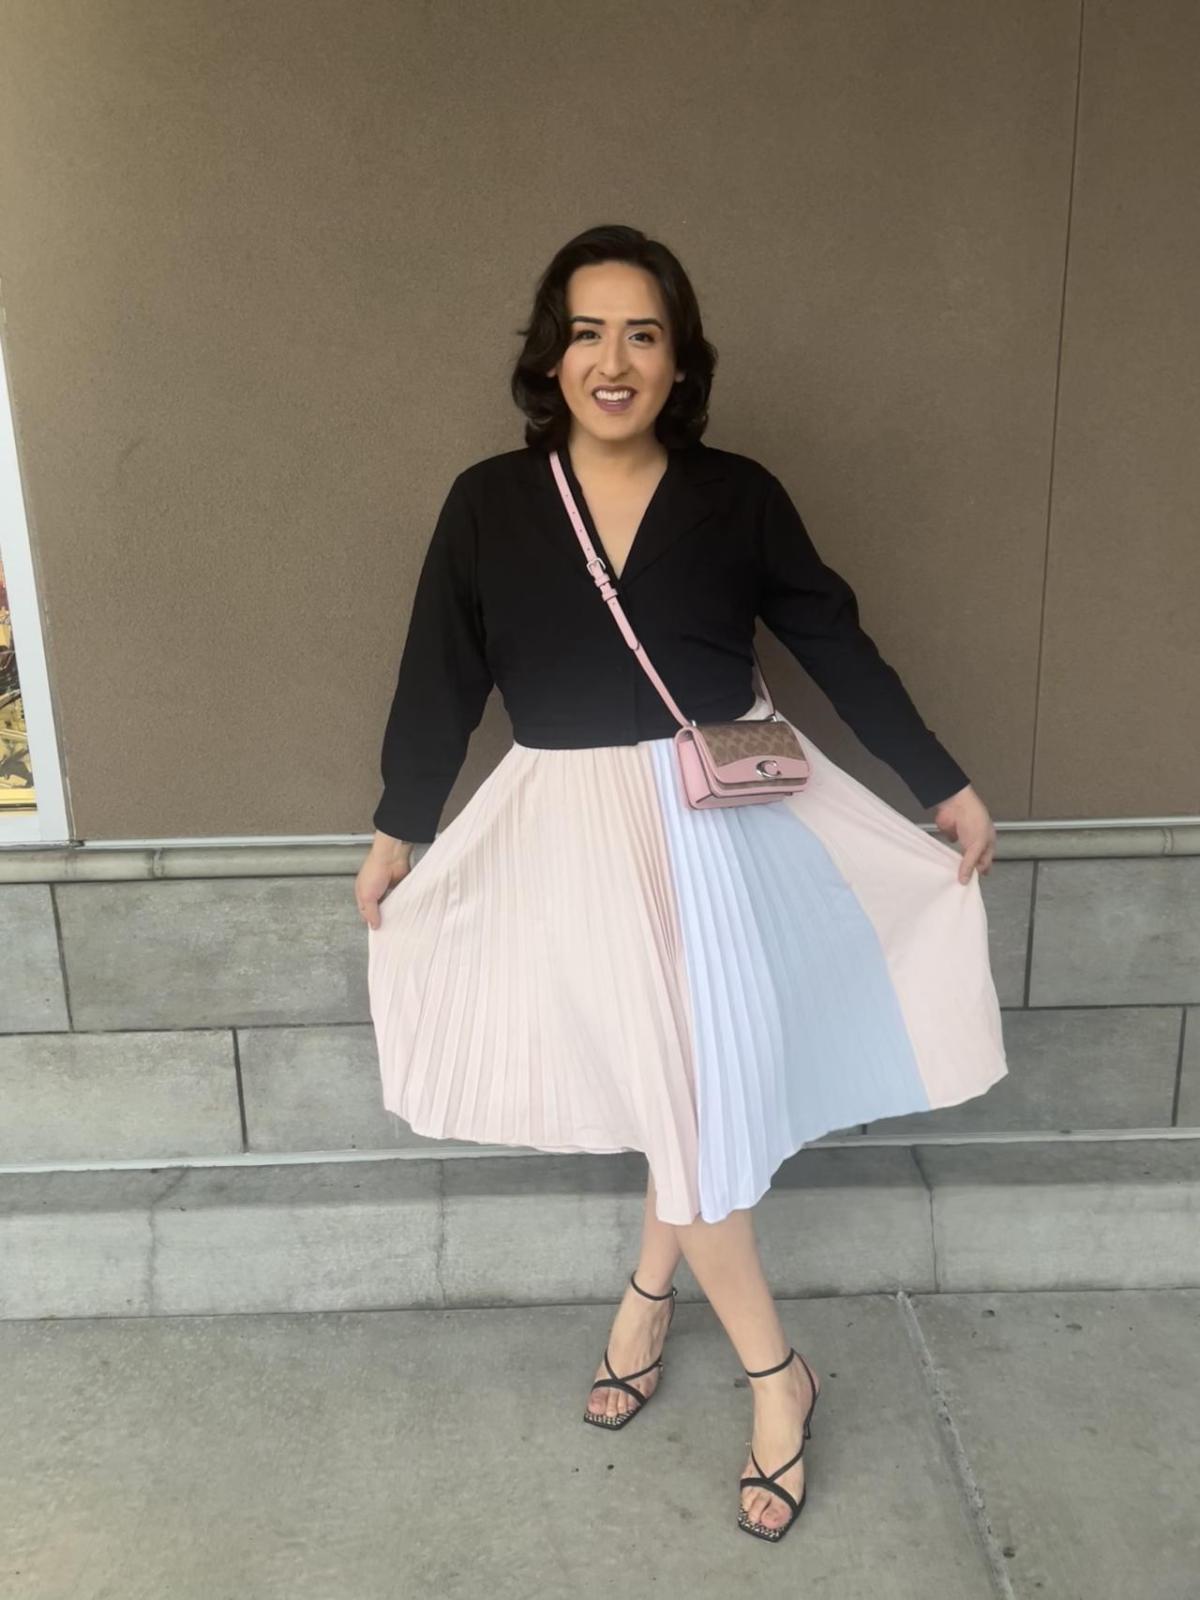 Curtlynn shows off her skirt, pleated pastel striped, strapy black heels and black v-neck top. She stands, smiling, in front of an exterior beige wall.